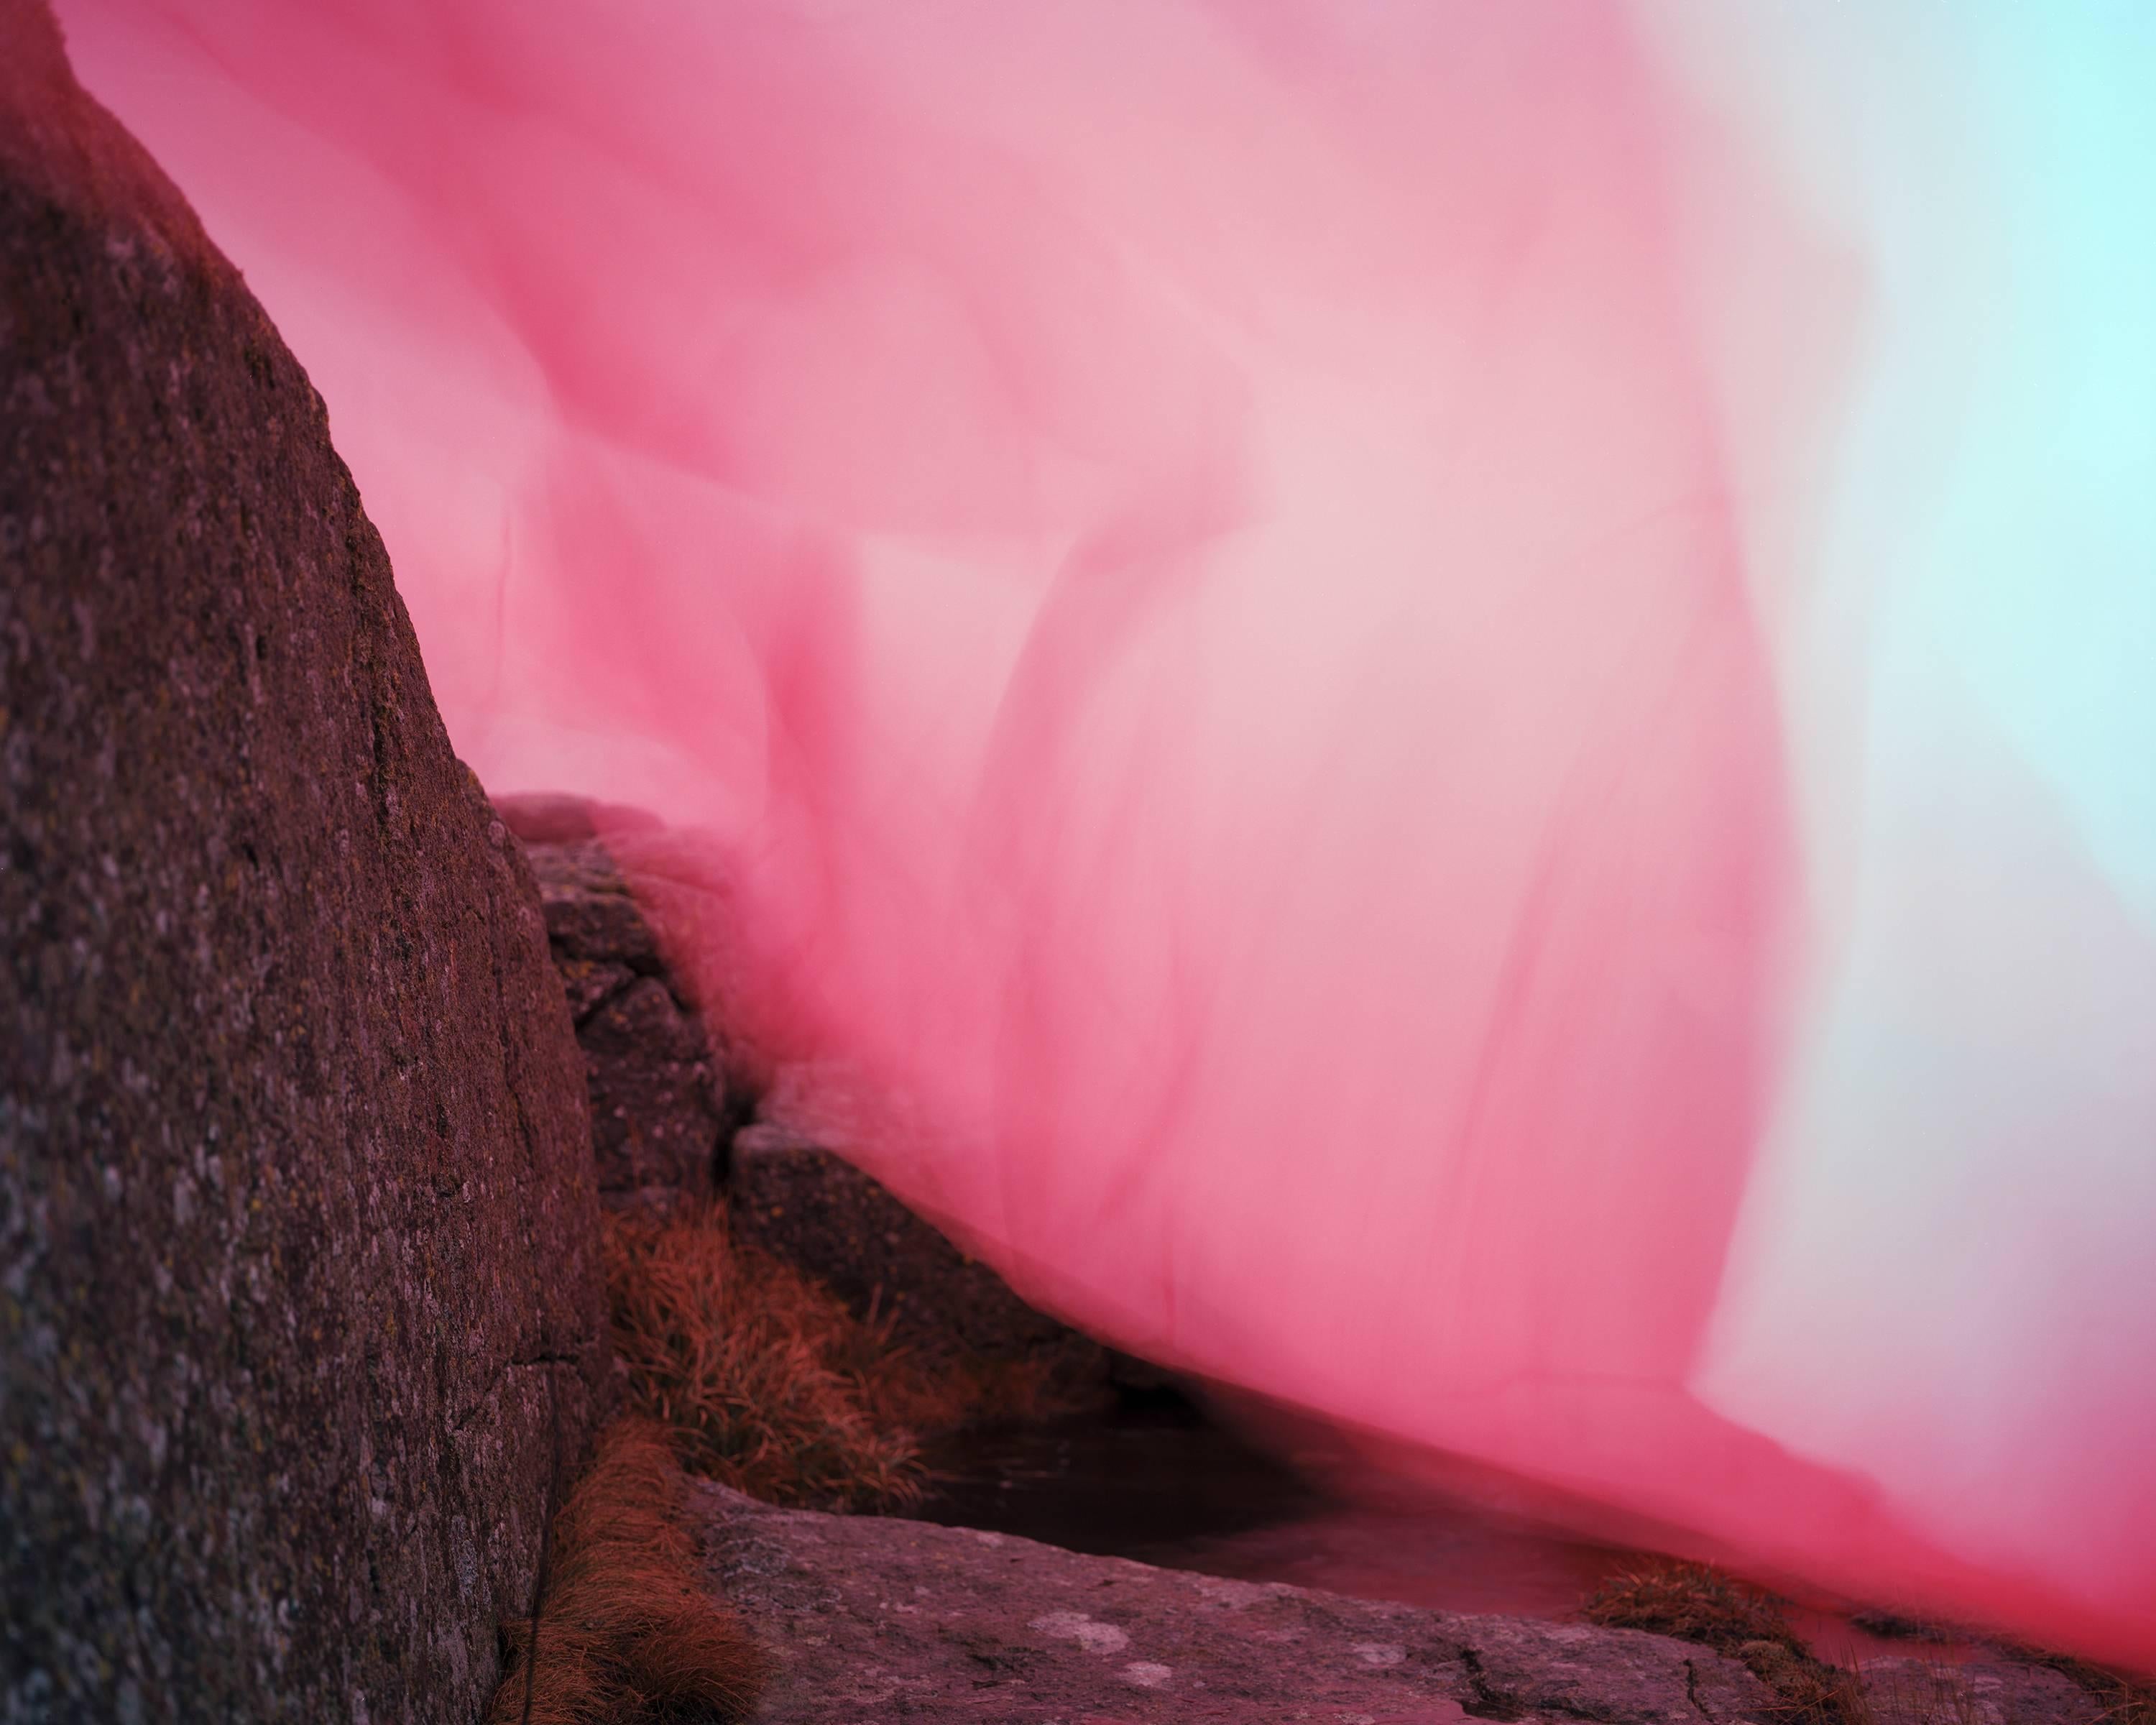 Ole Brodersen Landscape Photograph - Cloth and String #8 - pink Scandinavian abstract landscape photograph